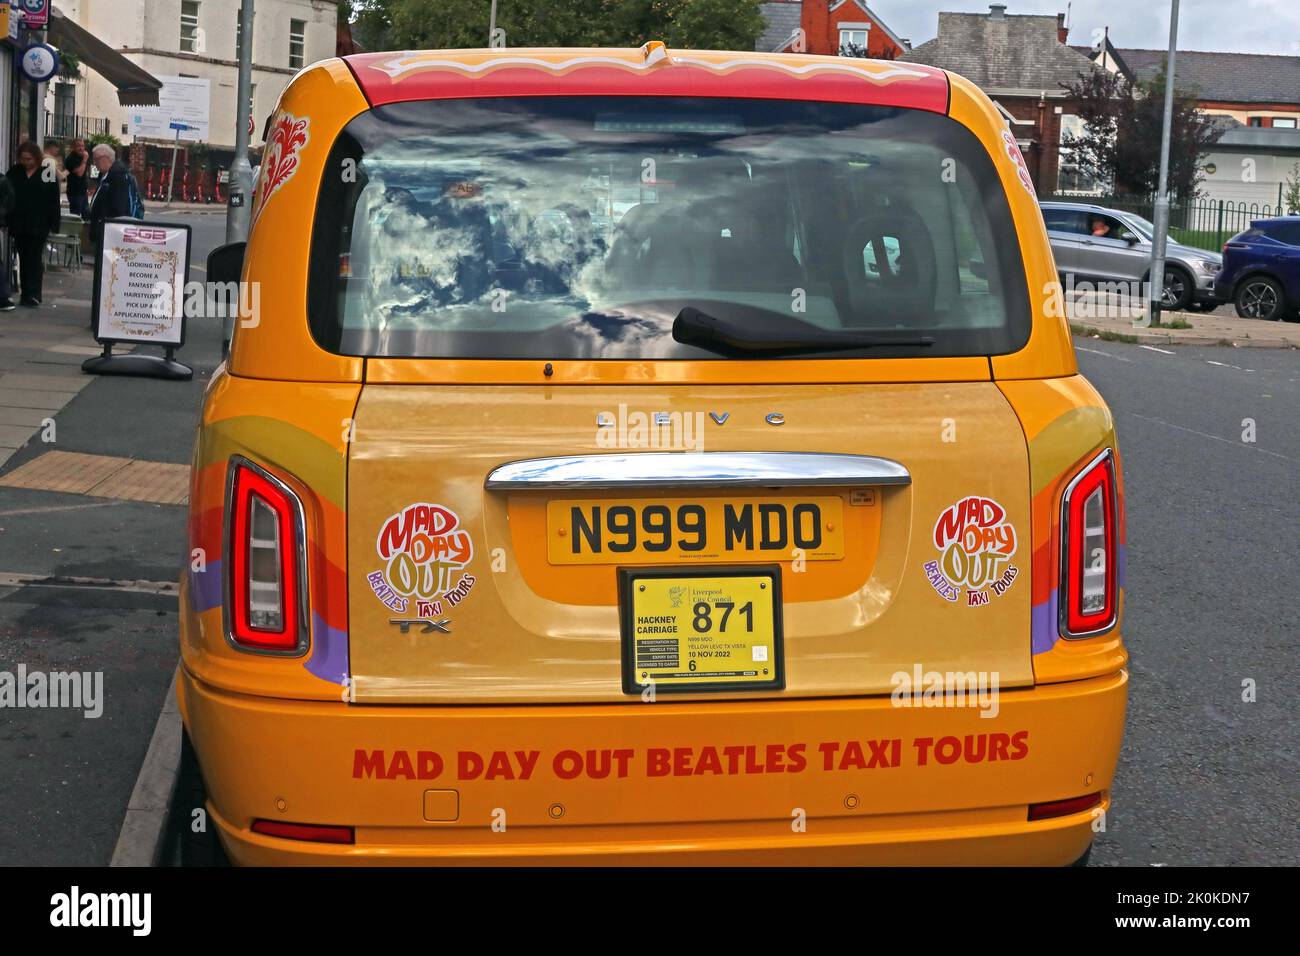 Jaune, Mad Day Out, Beatles taxi Tours, taxi, voyage touristique, À Penny Lane, Liverpool, Merseyside, Angleterre, Royaume-Uni, L18 Banque D'Images